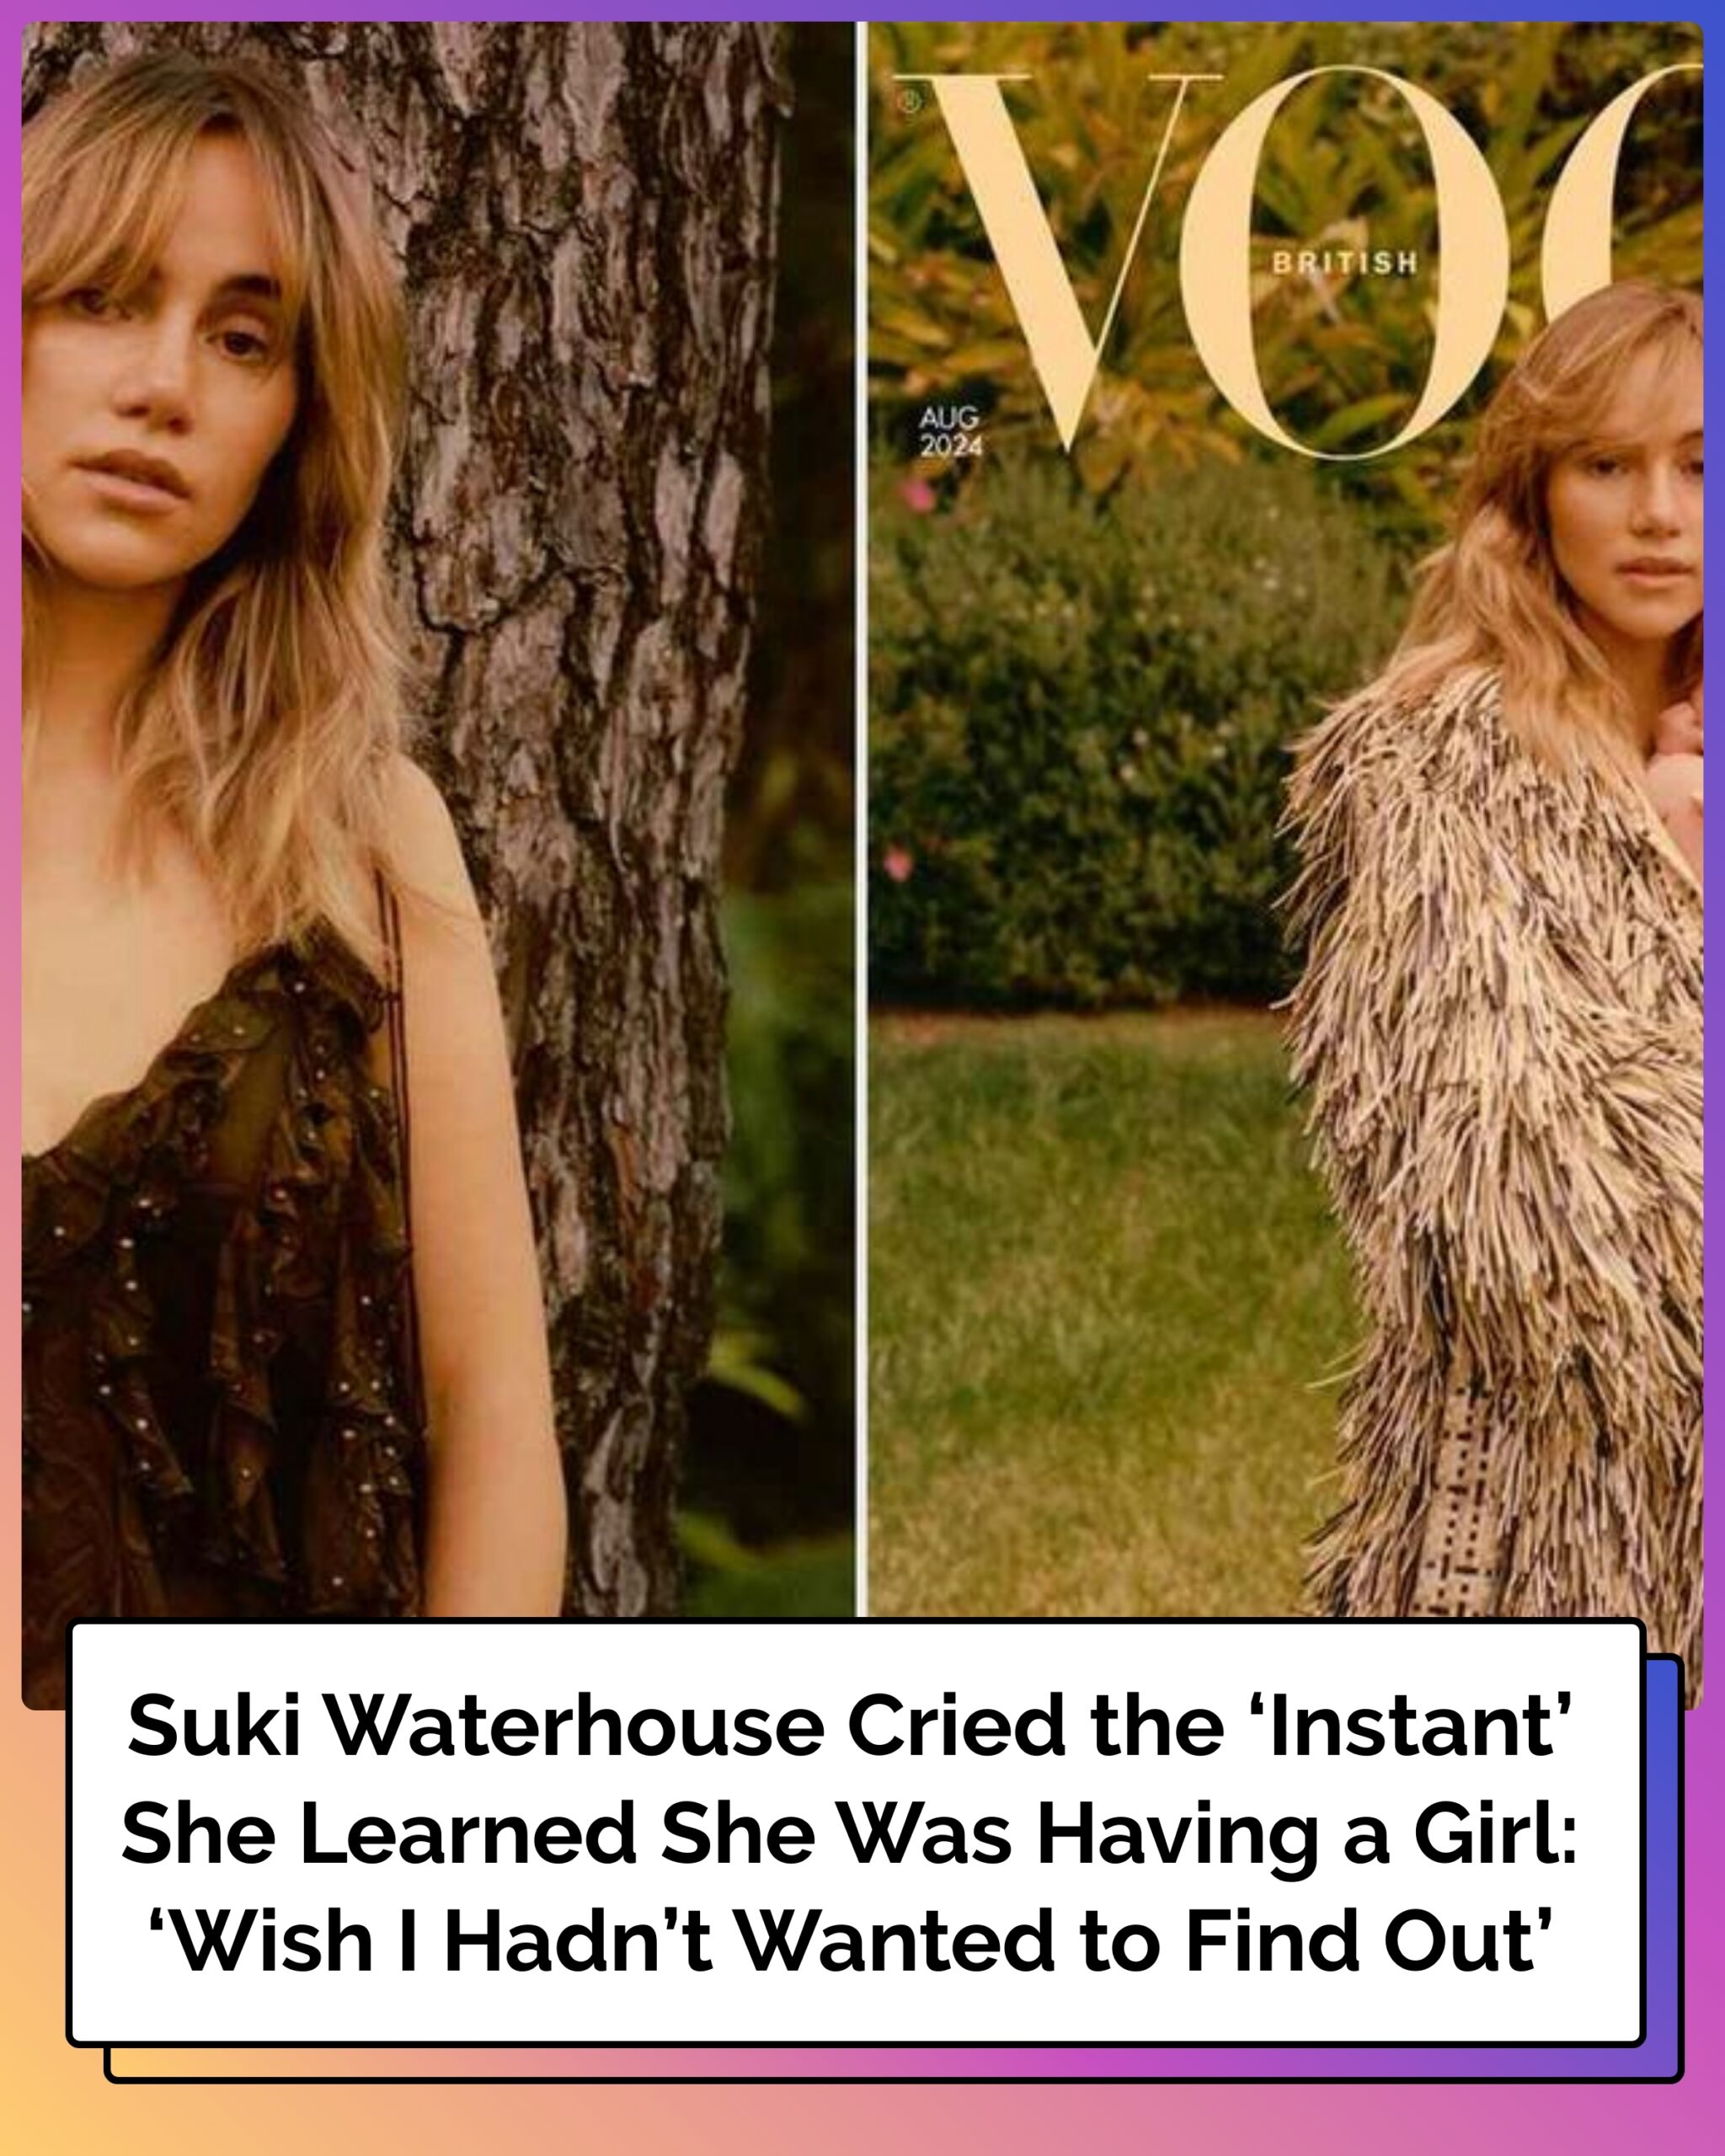 Suki Waterhouse Cried the ‘Instant’ She Learned She Was Having a Girl: ‘Wish I Hadn’t Wanted to Find Out’